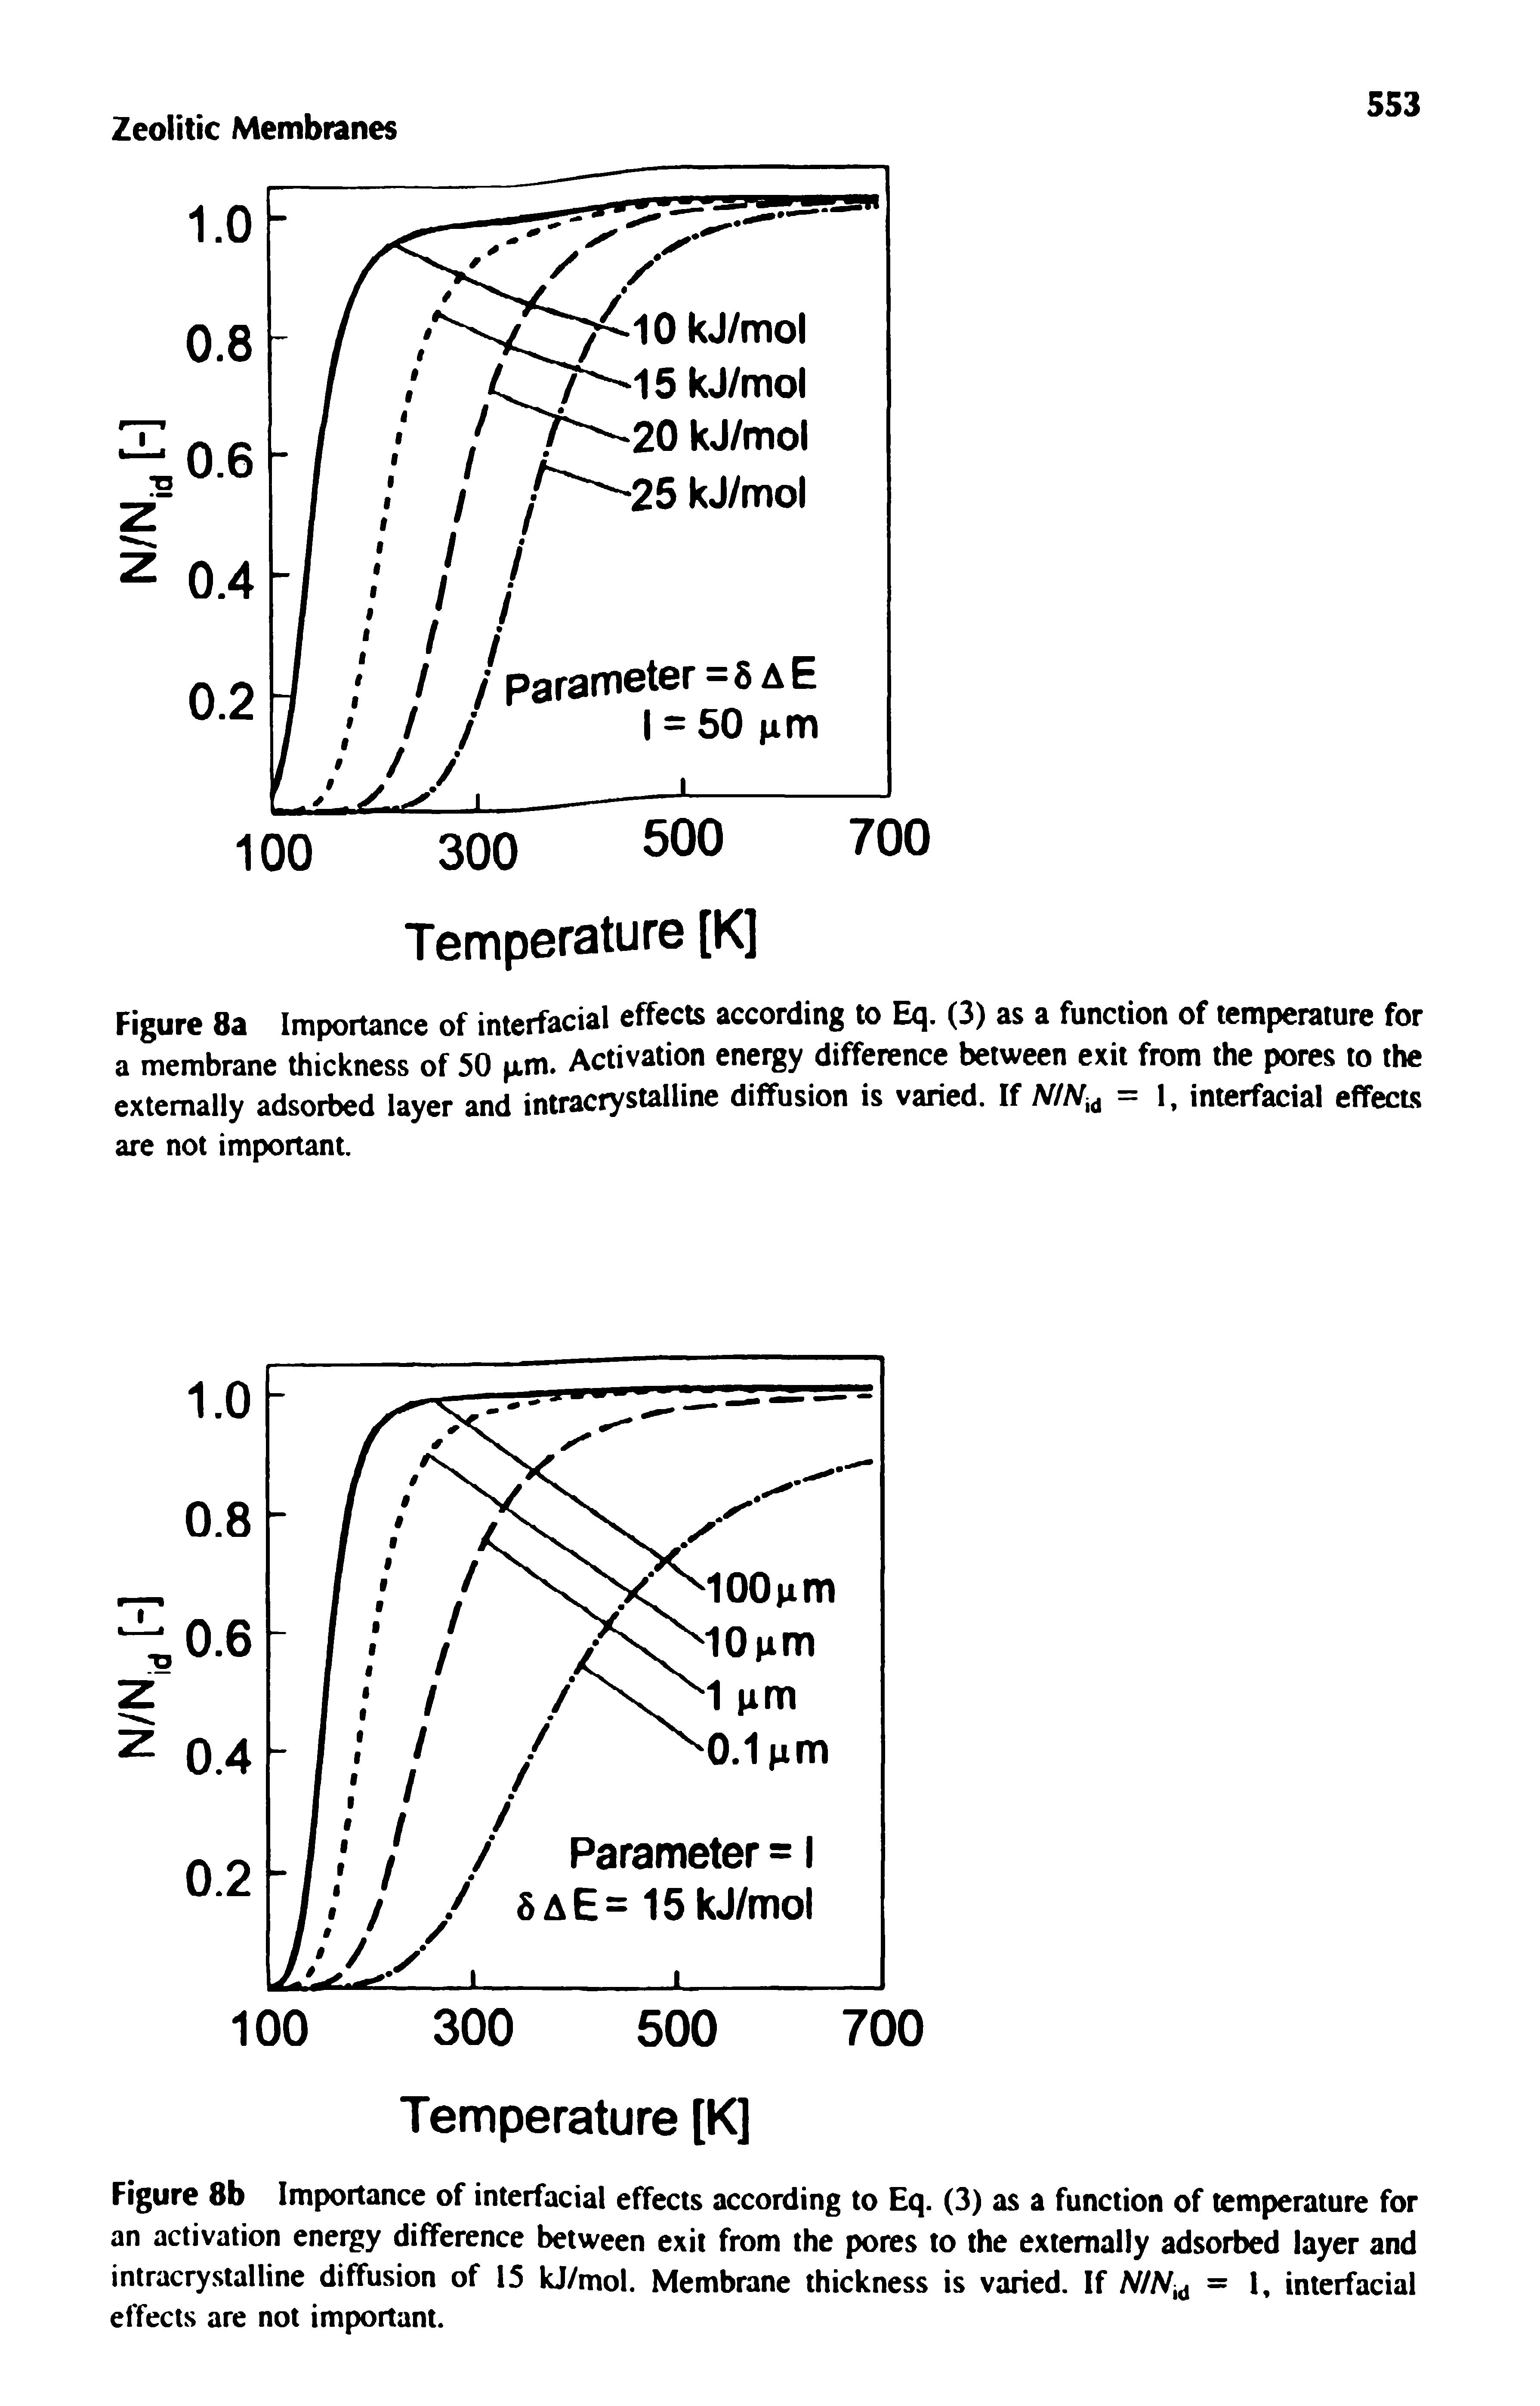 Figure 8a Importance of interfacial effects according to Eq. (3) as a function of temperature for a membrane thickness of 50 p,m. Activation energy difference between exit from the pores to the externally adsorbed layer and intracrystalline diffusion is varied. If N N = 1, interfacial effects are not important.